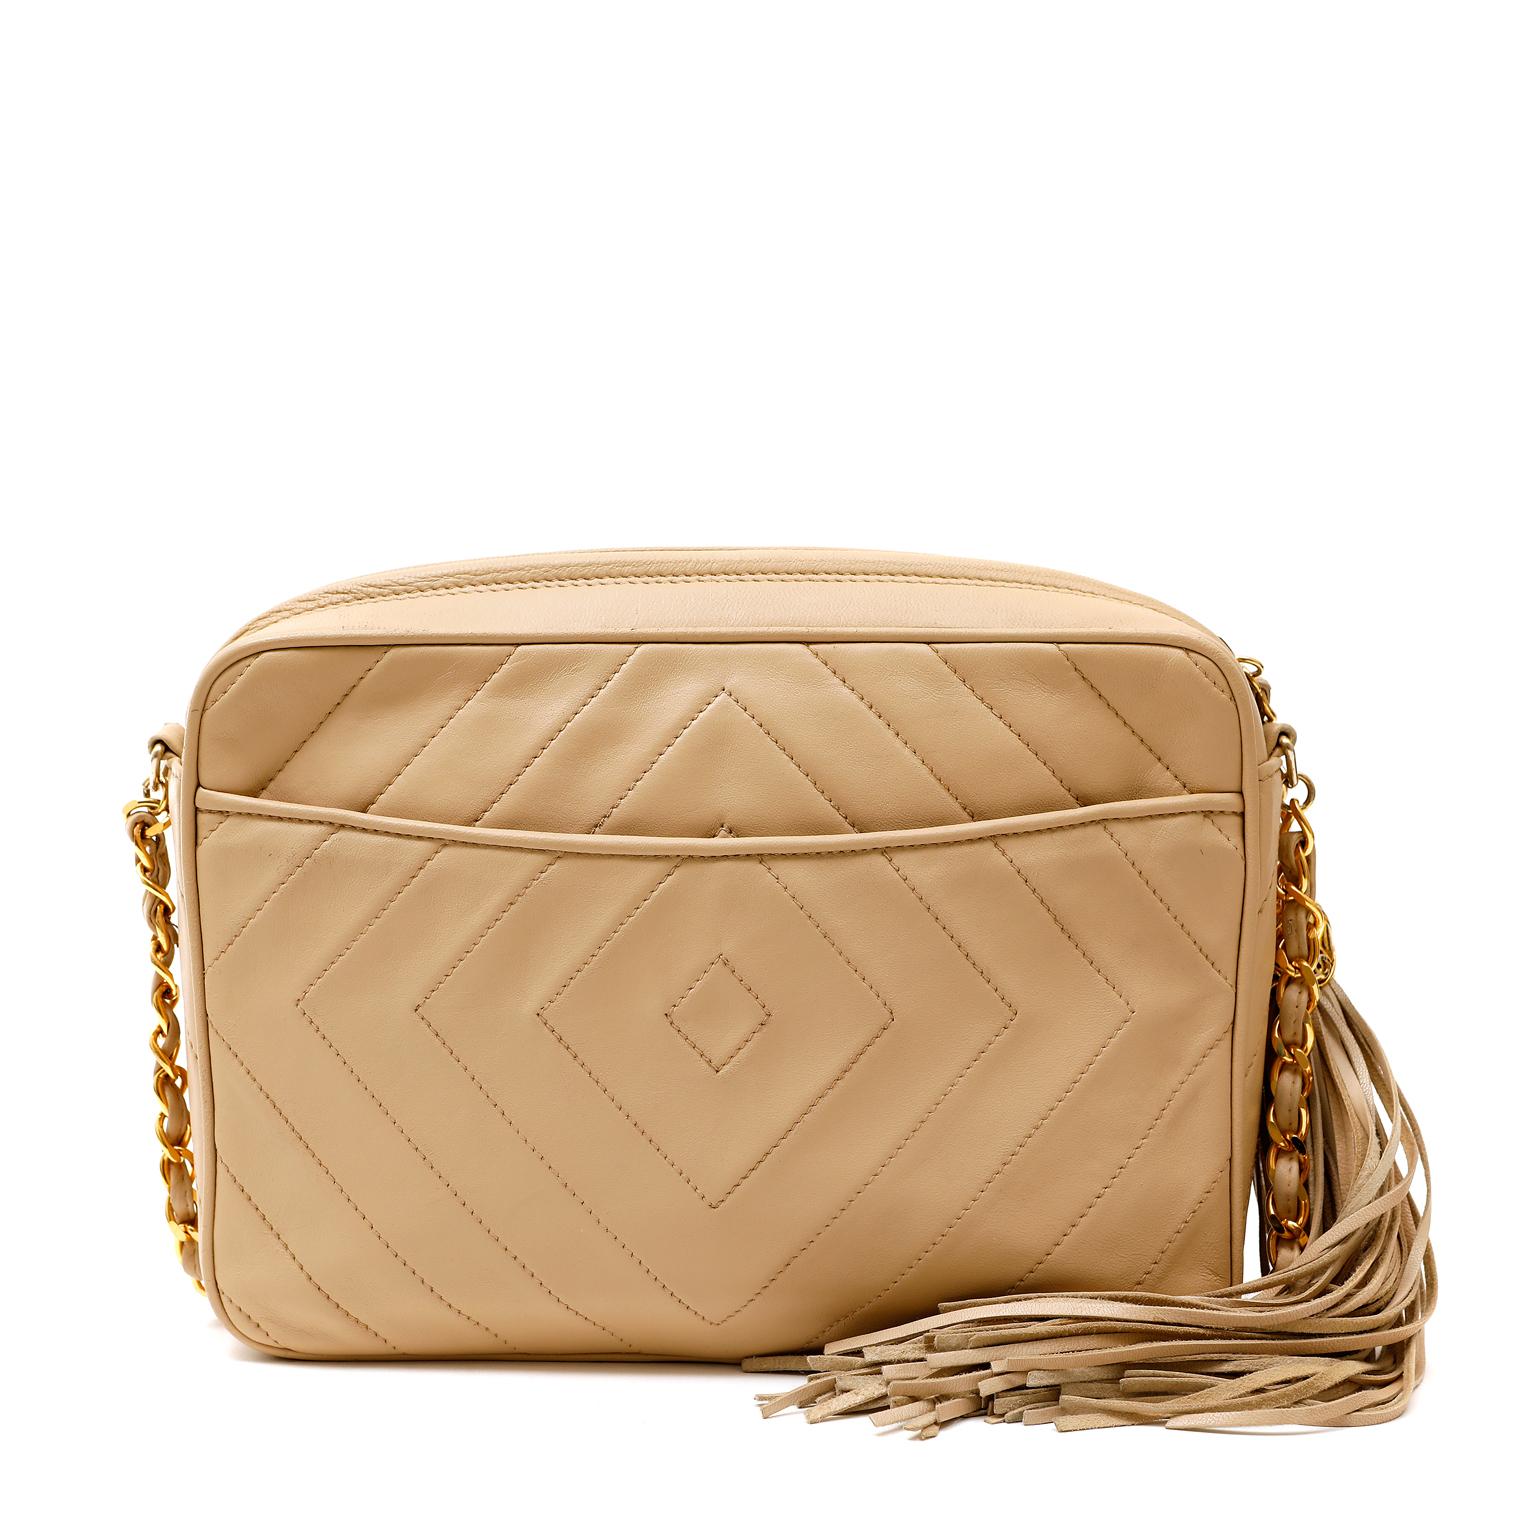 Chanel Beige Quilted Leather Vintage Camera Bag In Good Condition For Sale In Palm Beach, FL